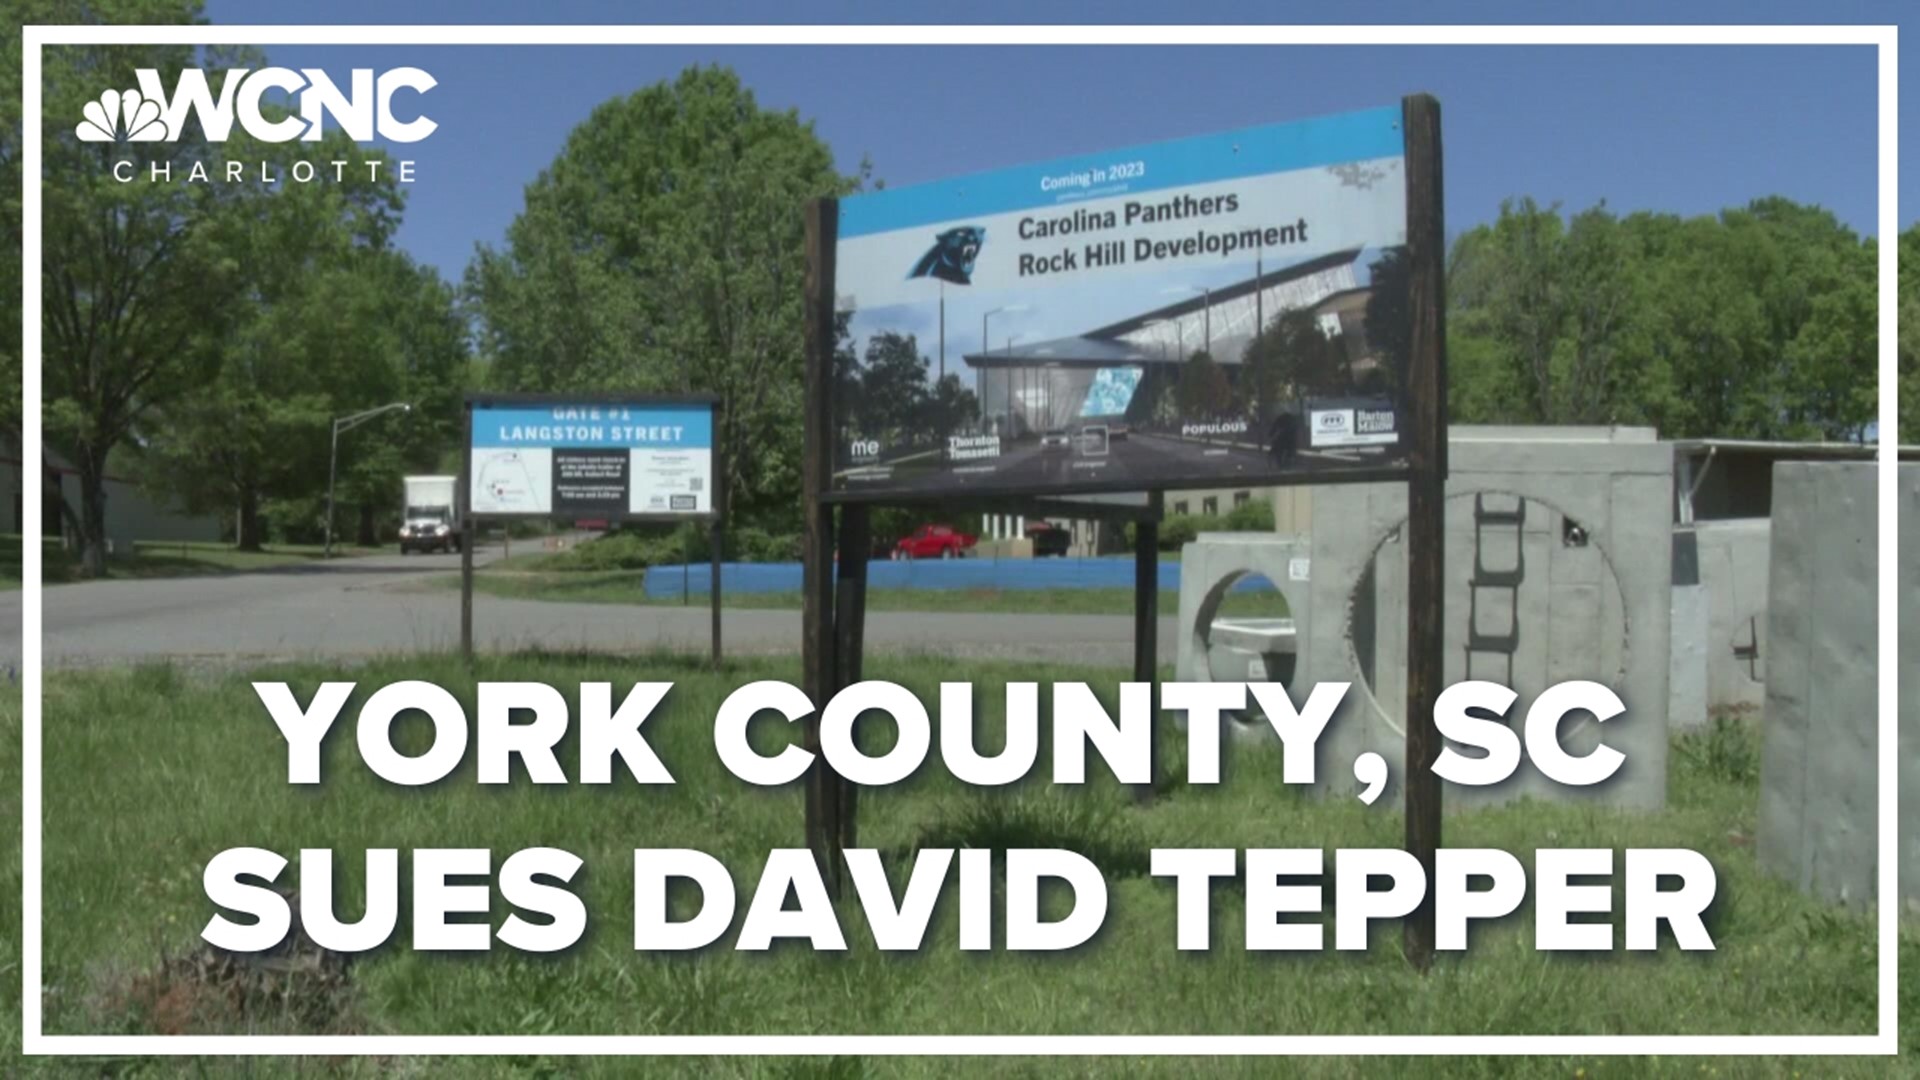 York County is seeking $21 million it says David Tepper's companies took from taxpayers for purposes other than they asked for in the agreement.